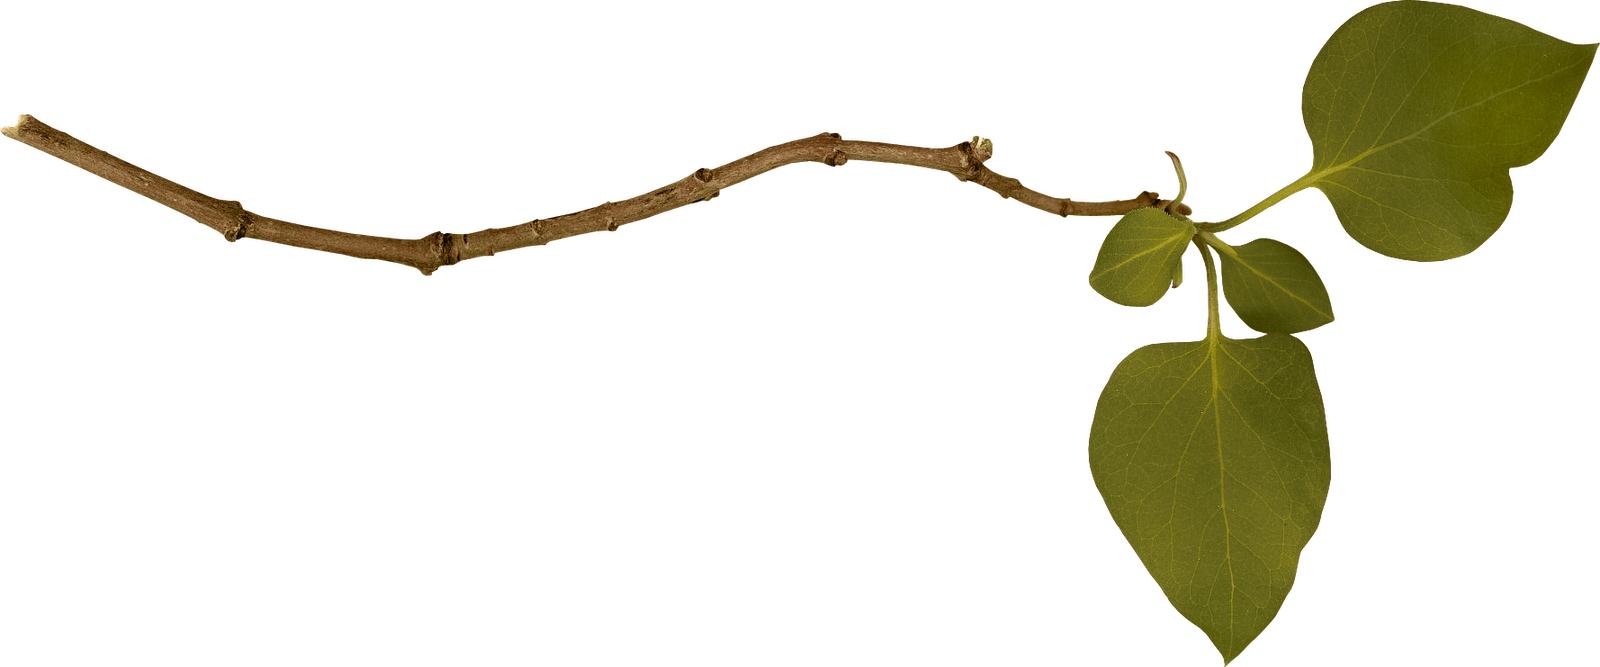 Branch Png Image PNG Image